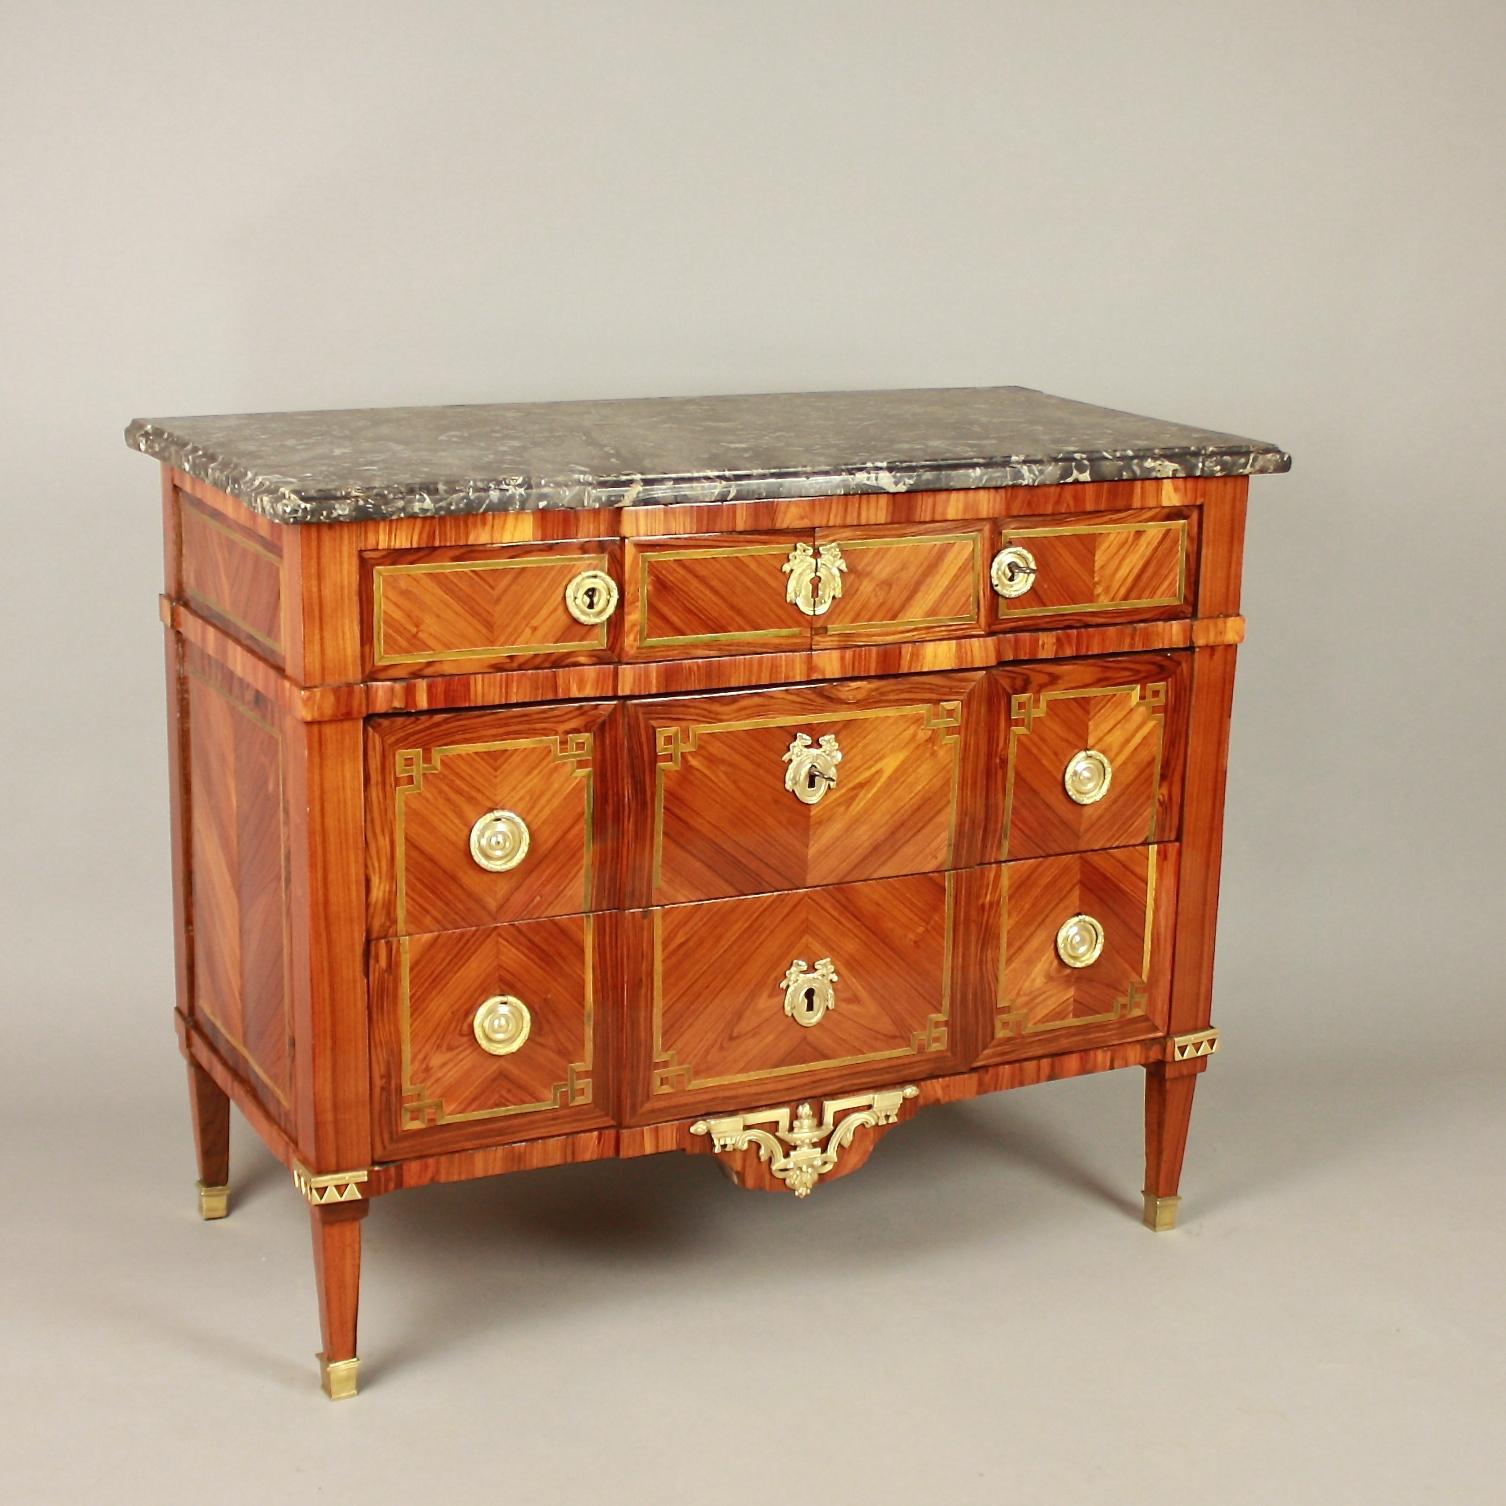 Bronze 18th Century French Louis XVI Breakfront Commode, circa 1770, stamped by FCFranc